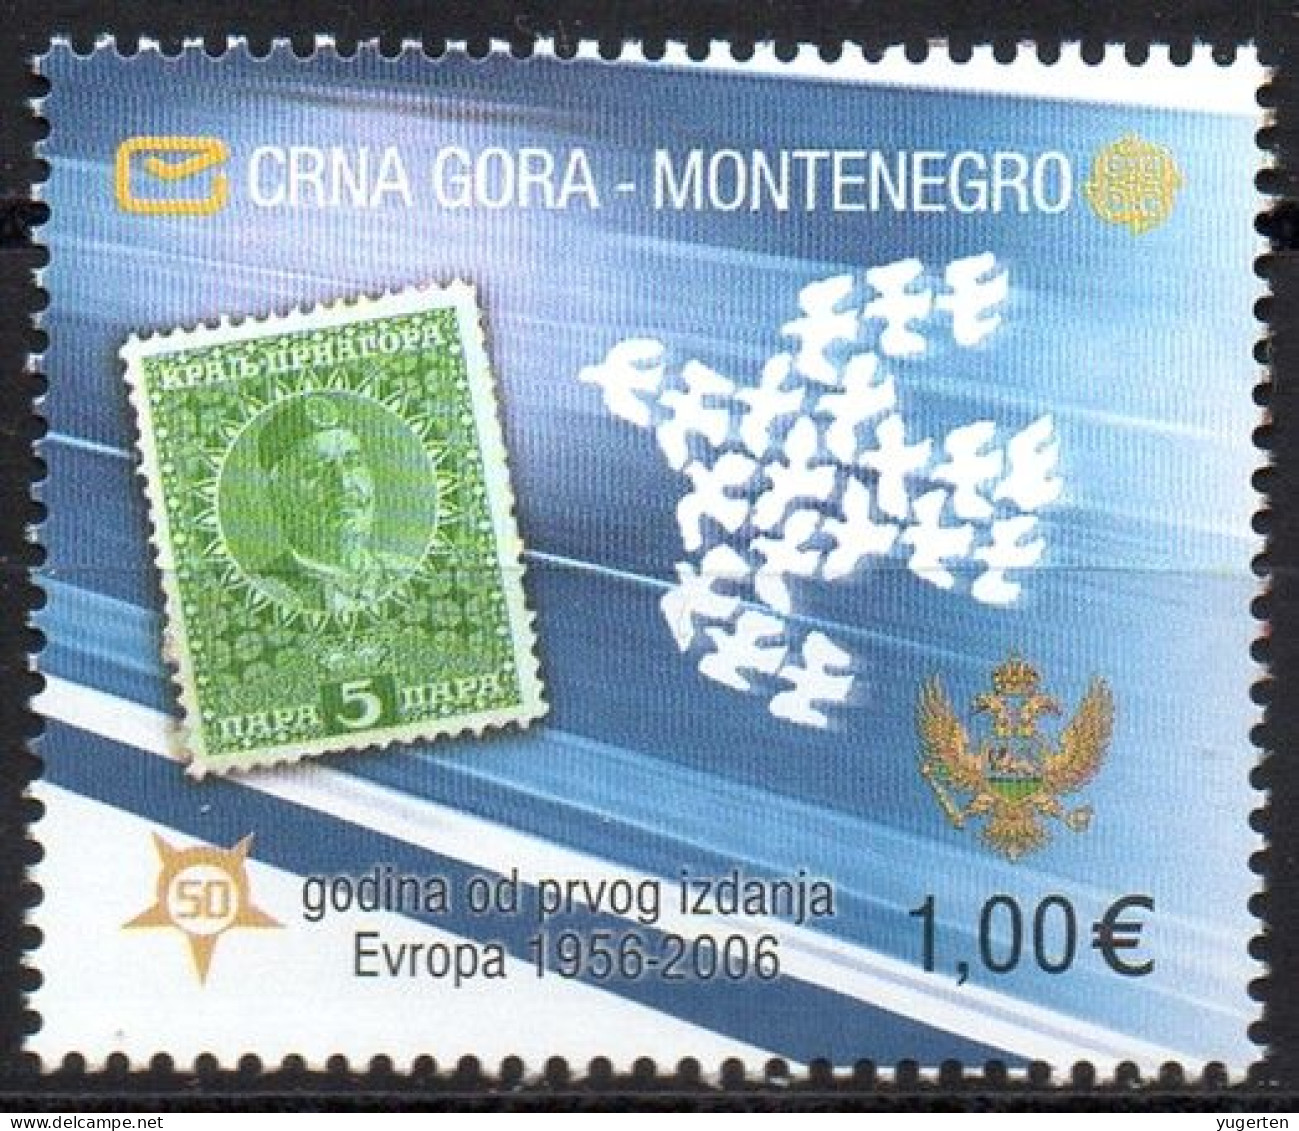 MONTENEGRO 2006 - 1v - MNH - Europa 50 Years Anniv.- Colombe - Pigeon - Peace - Paix - Dove - Stamps On Stamps Taube - Tauben & Flughühner